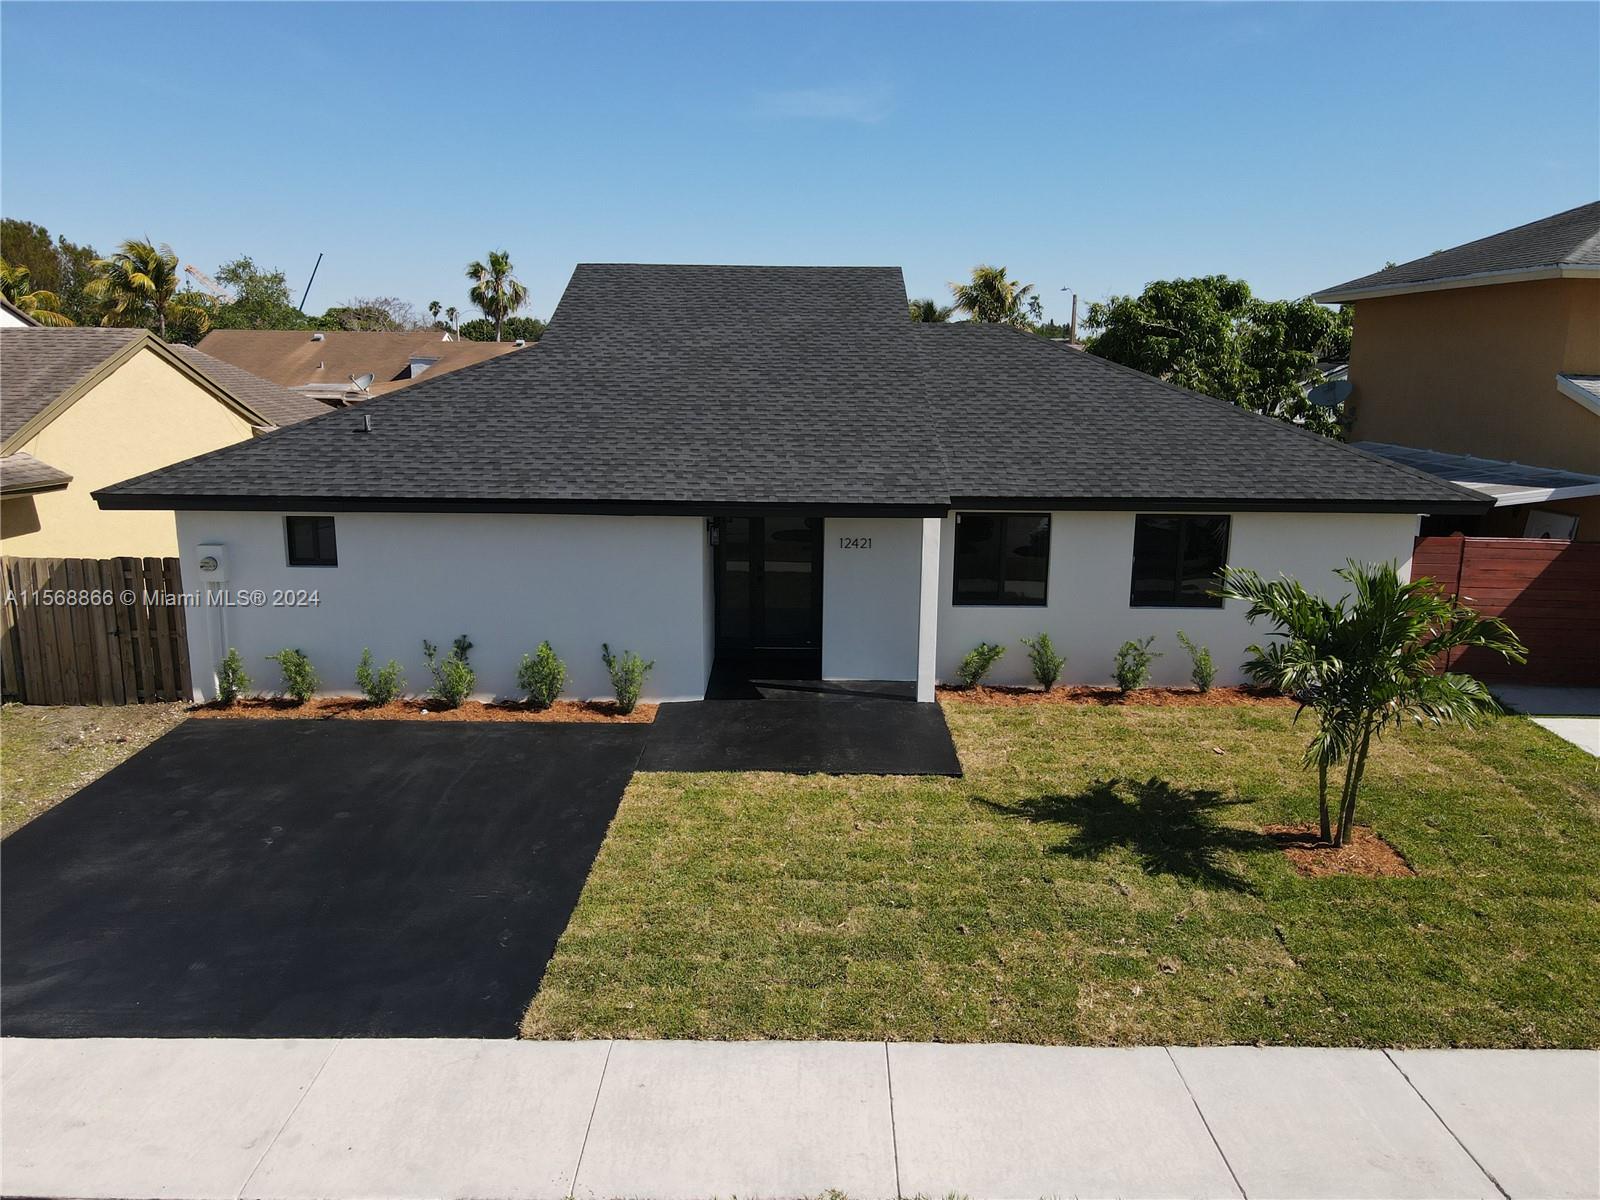 12421 SW 203rd St  For Sale A11568866, FL